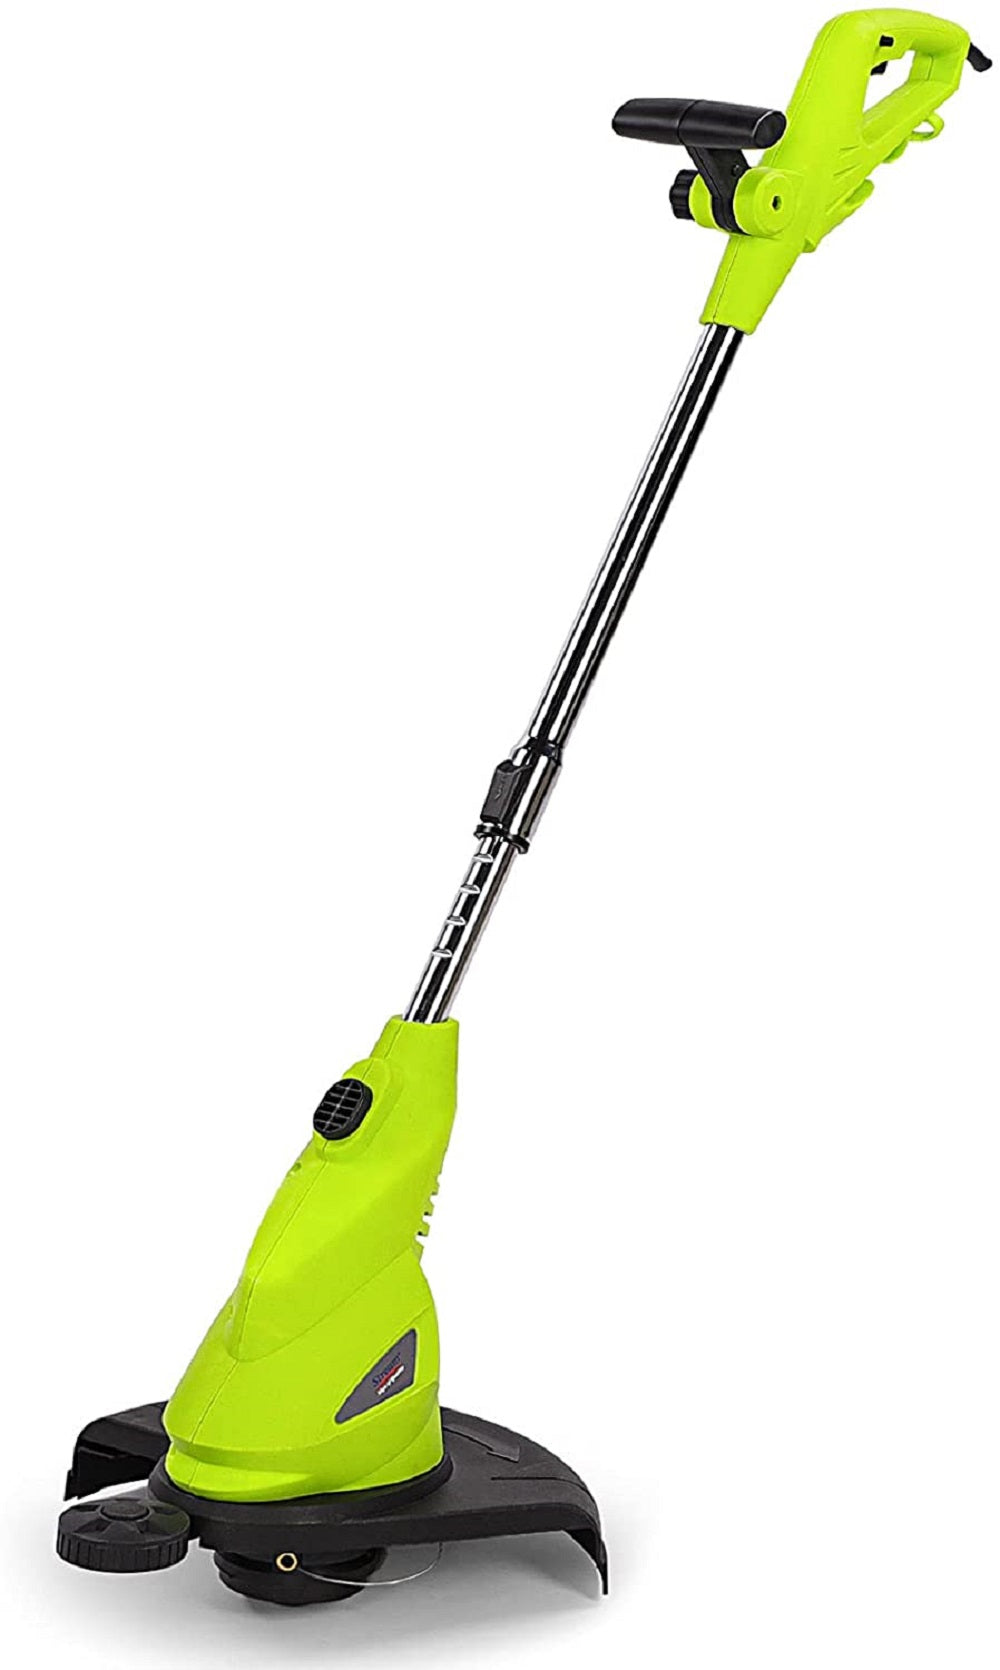 String Grass Trimmer, Stream Electric Strimmer, Weed and Yard